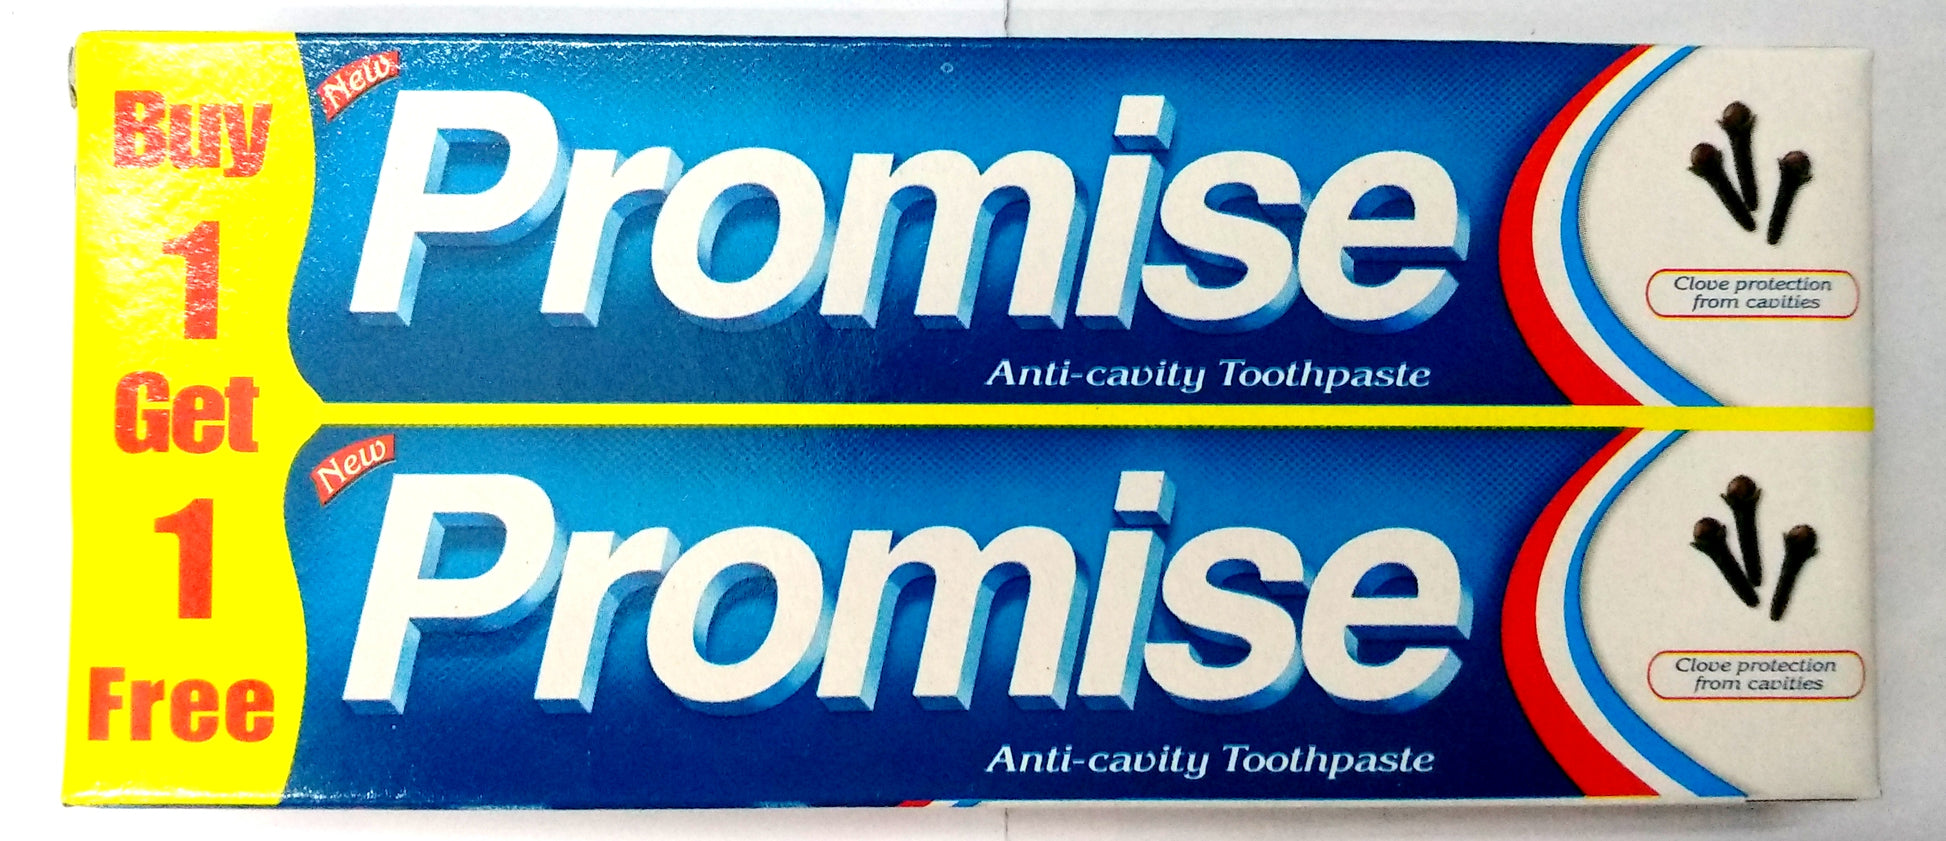 Shop Dabur Promise Toothpaste 90gm + 90gm at price 50.00 from Dabur Online - Ayush Care